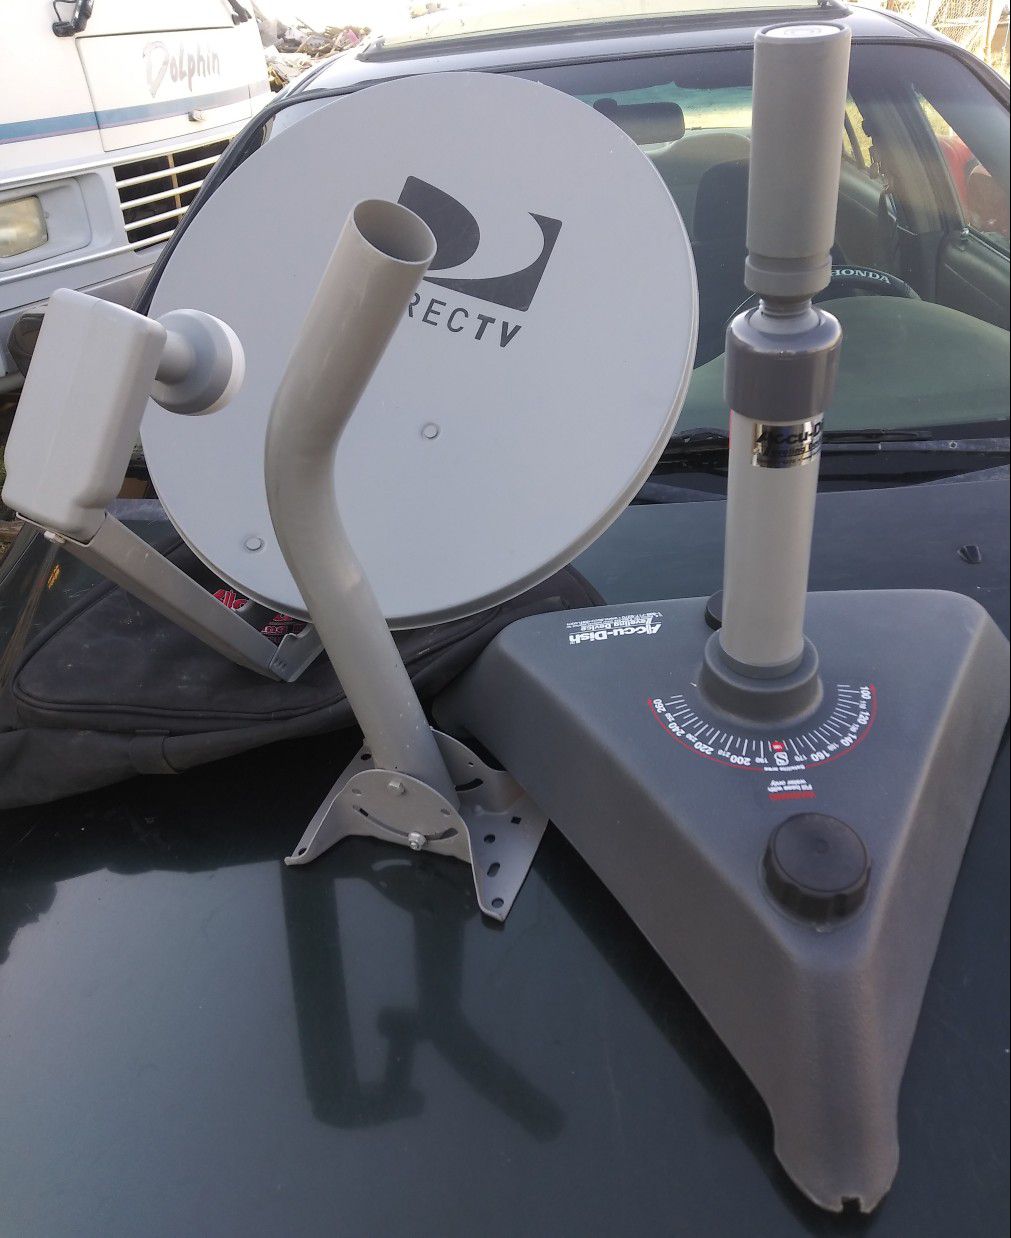 Accu-dish. for RVs and camp trailers ($75 )